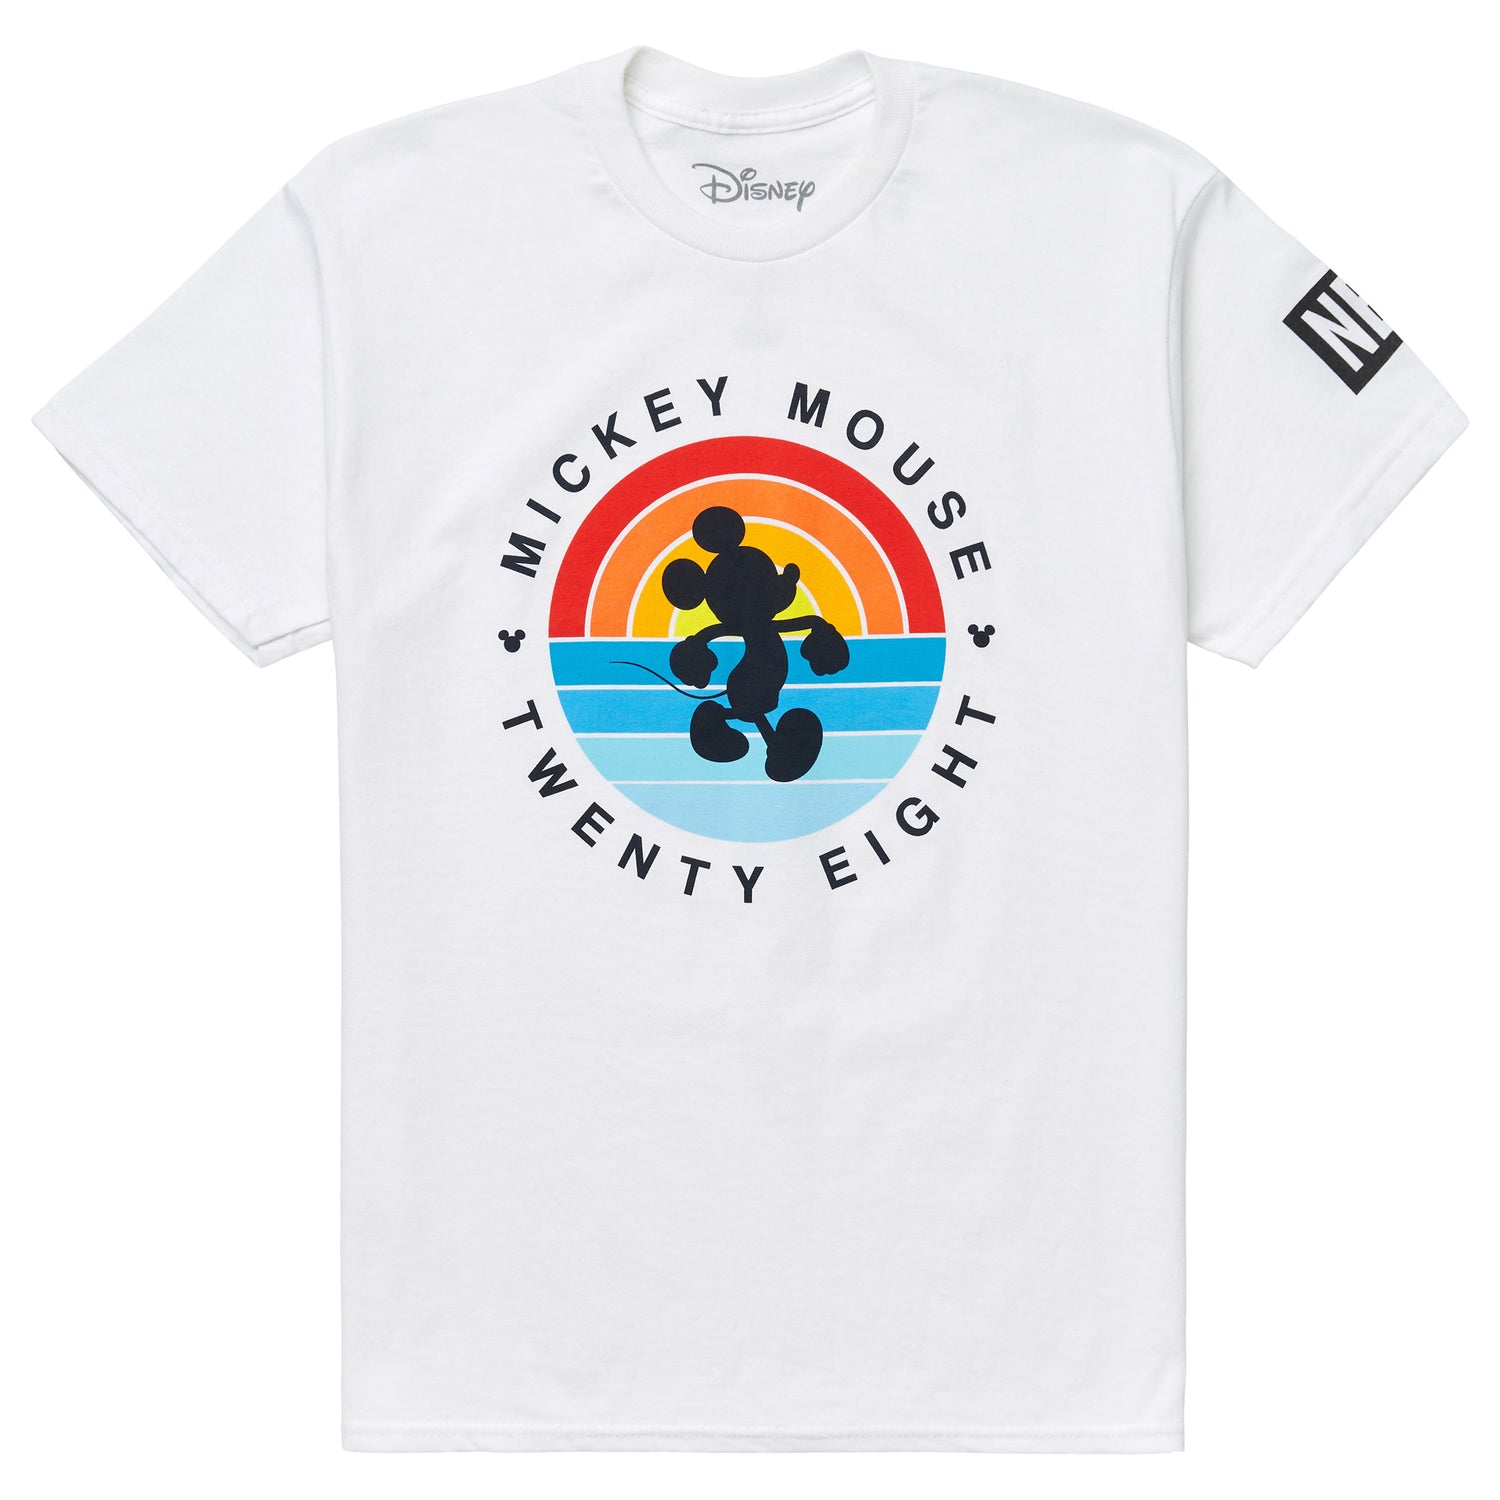 MICKEY MOUSE THICK LINES TEE - WHITE